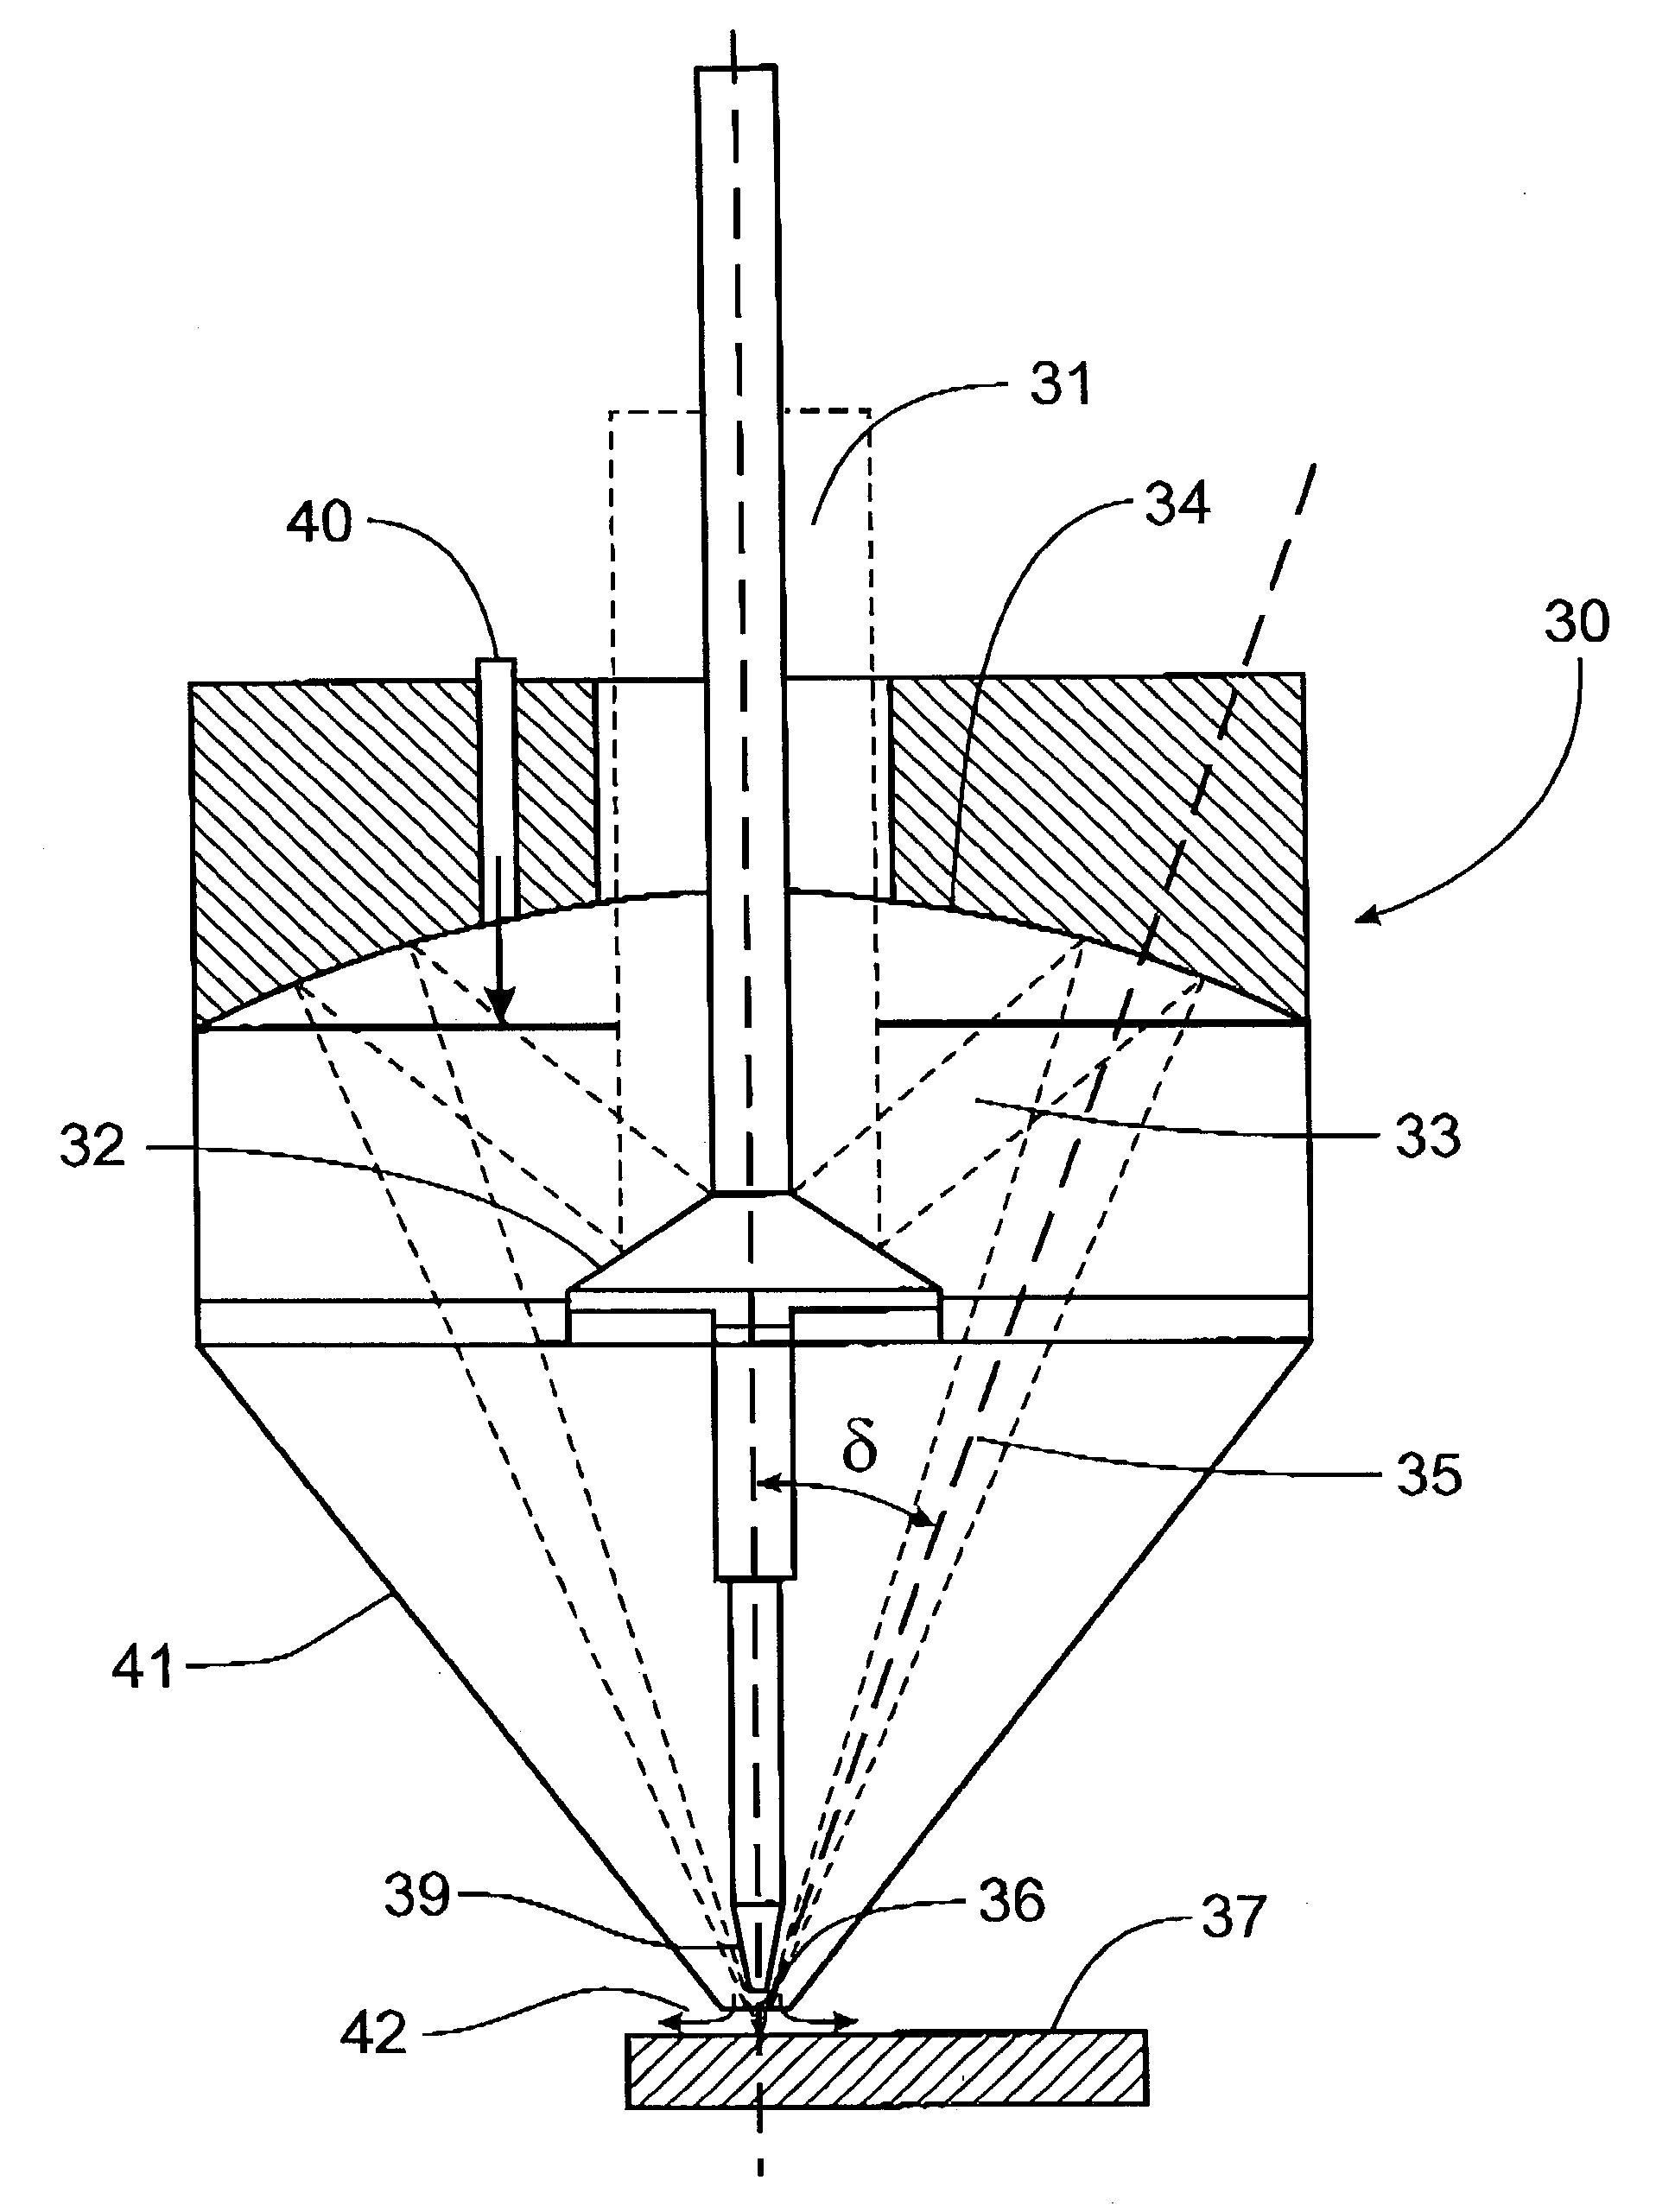 Laser consolidation apparatus for manufacturing precise structures